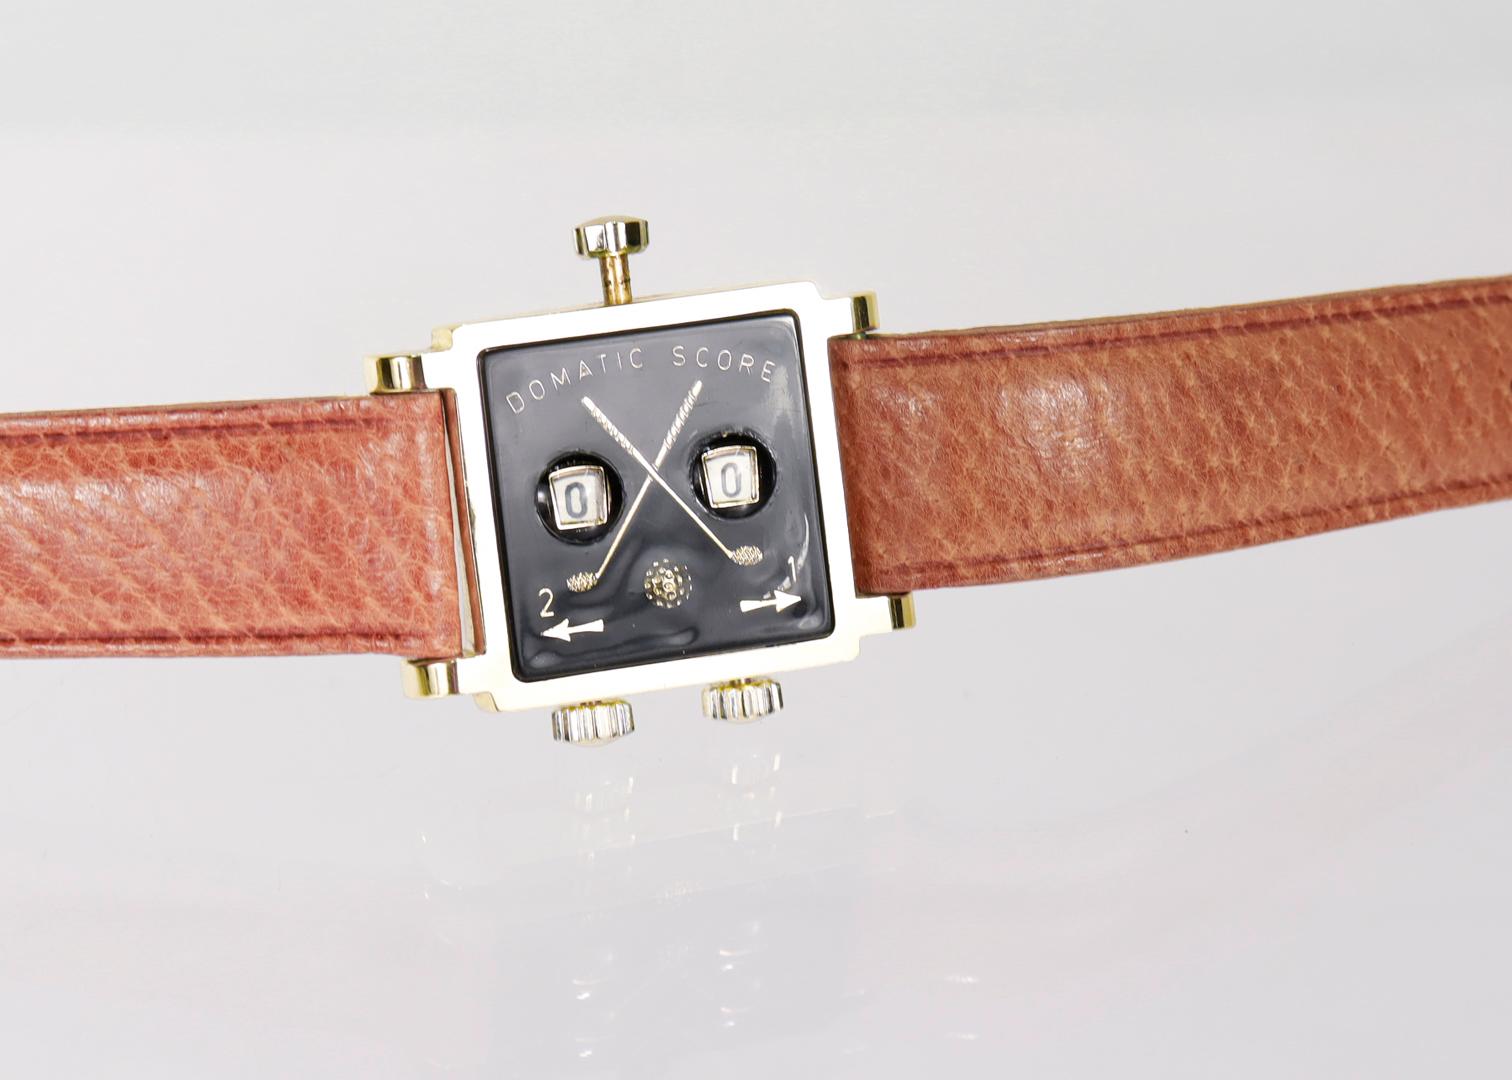 Leather Rare Vintage Swiss Domatic 'Fancy No. 3' Watch Style Golf Score Keeper / Counter For Sale